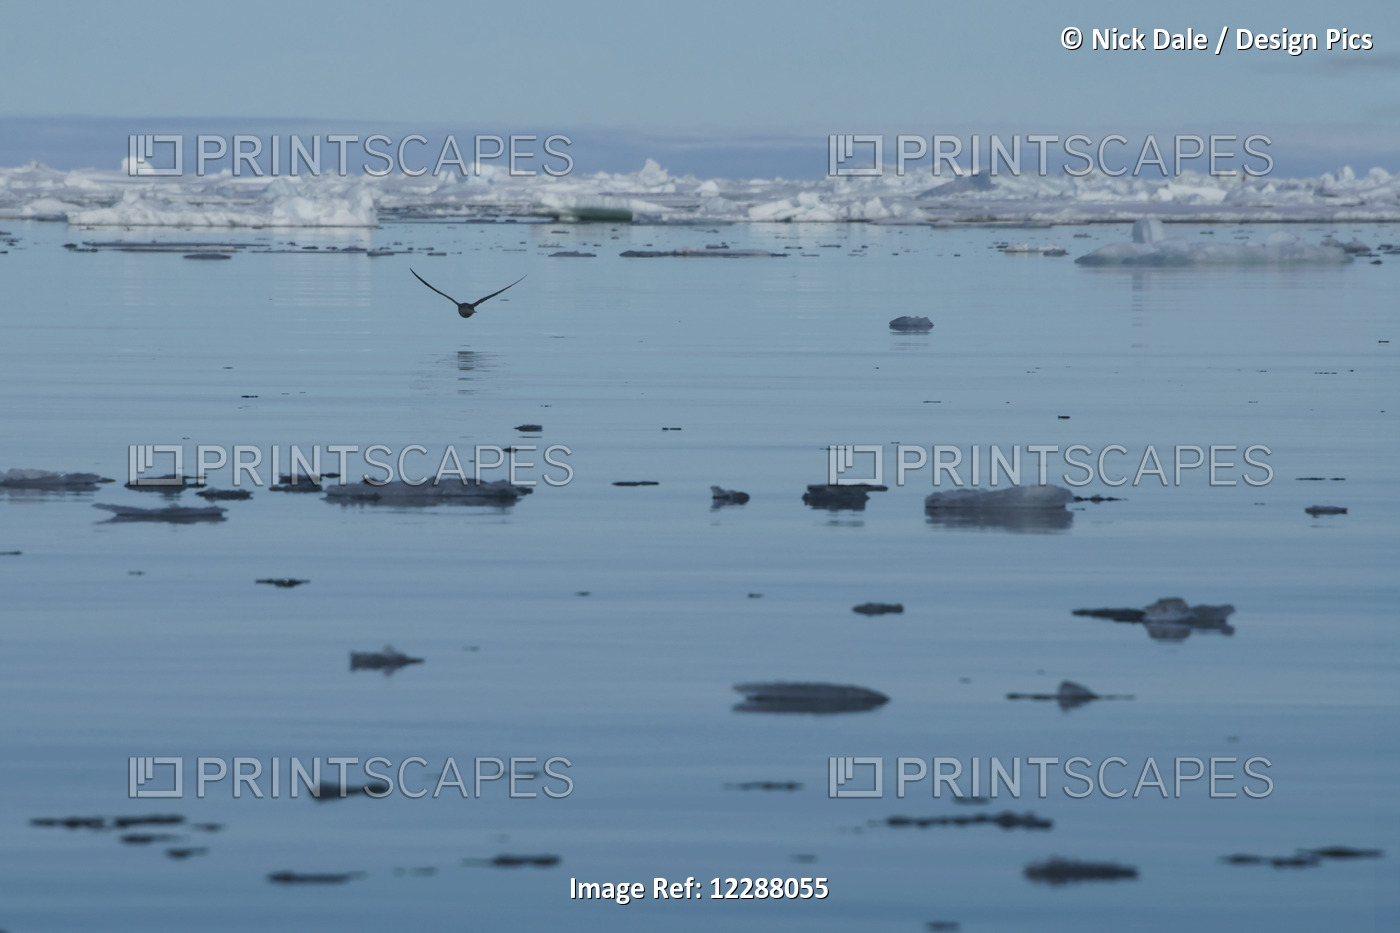 Ice Floats On The Tranquil Water And A Bird Flies Over The Water's Surface; ...